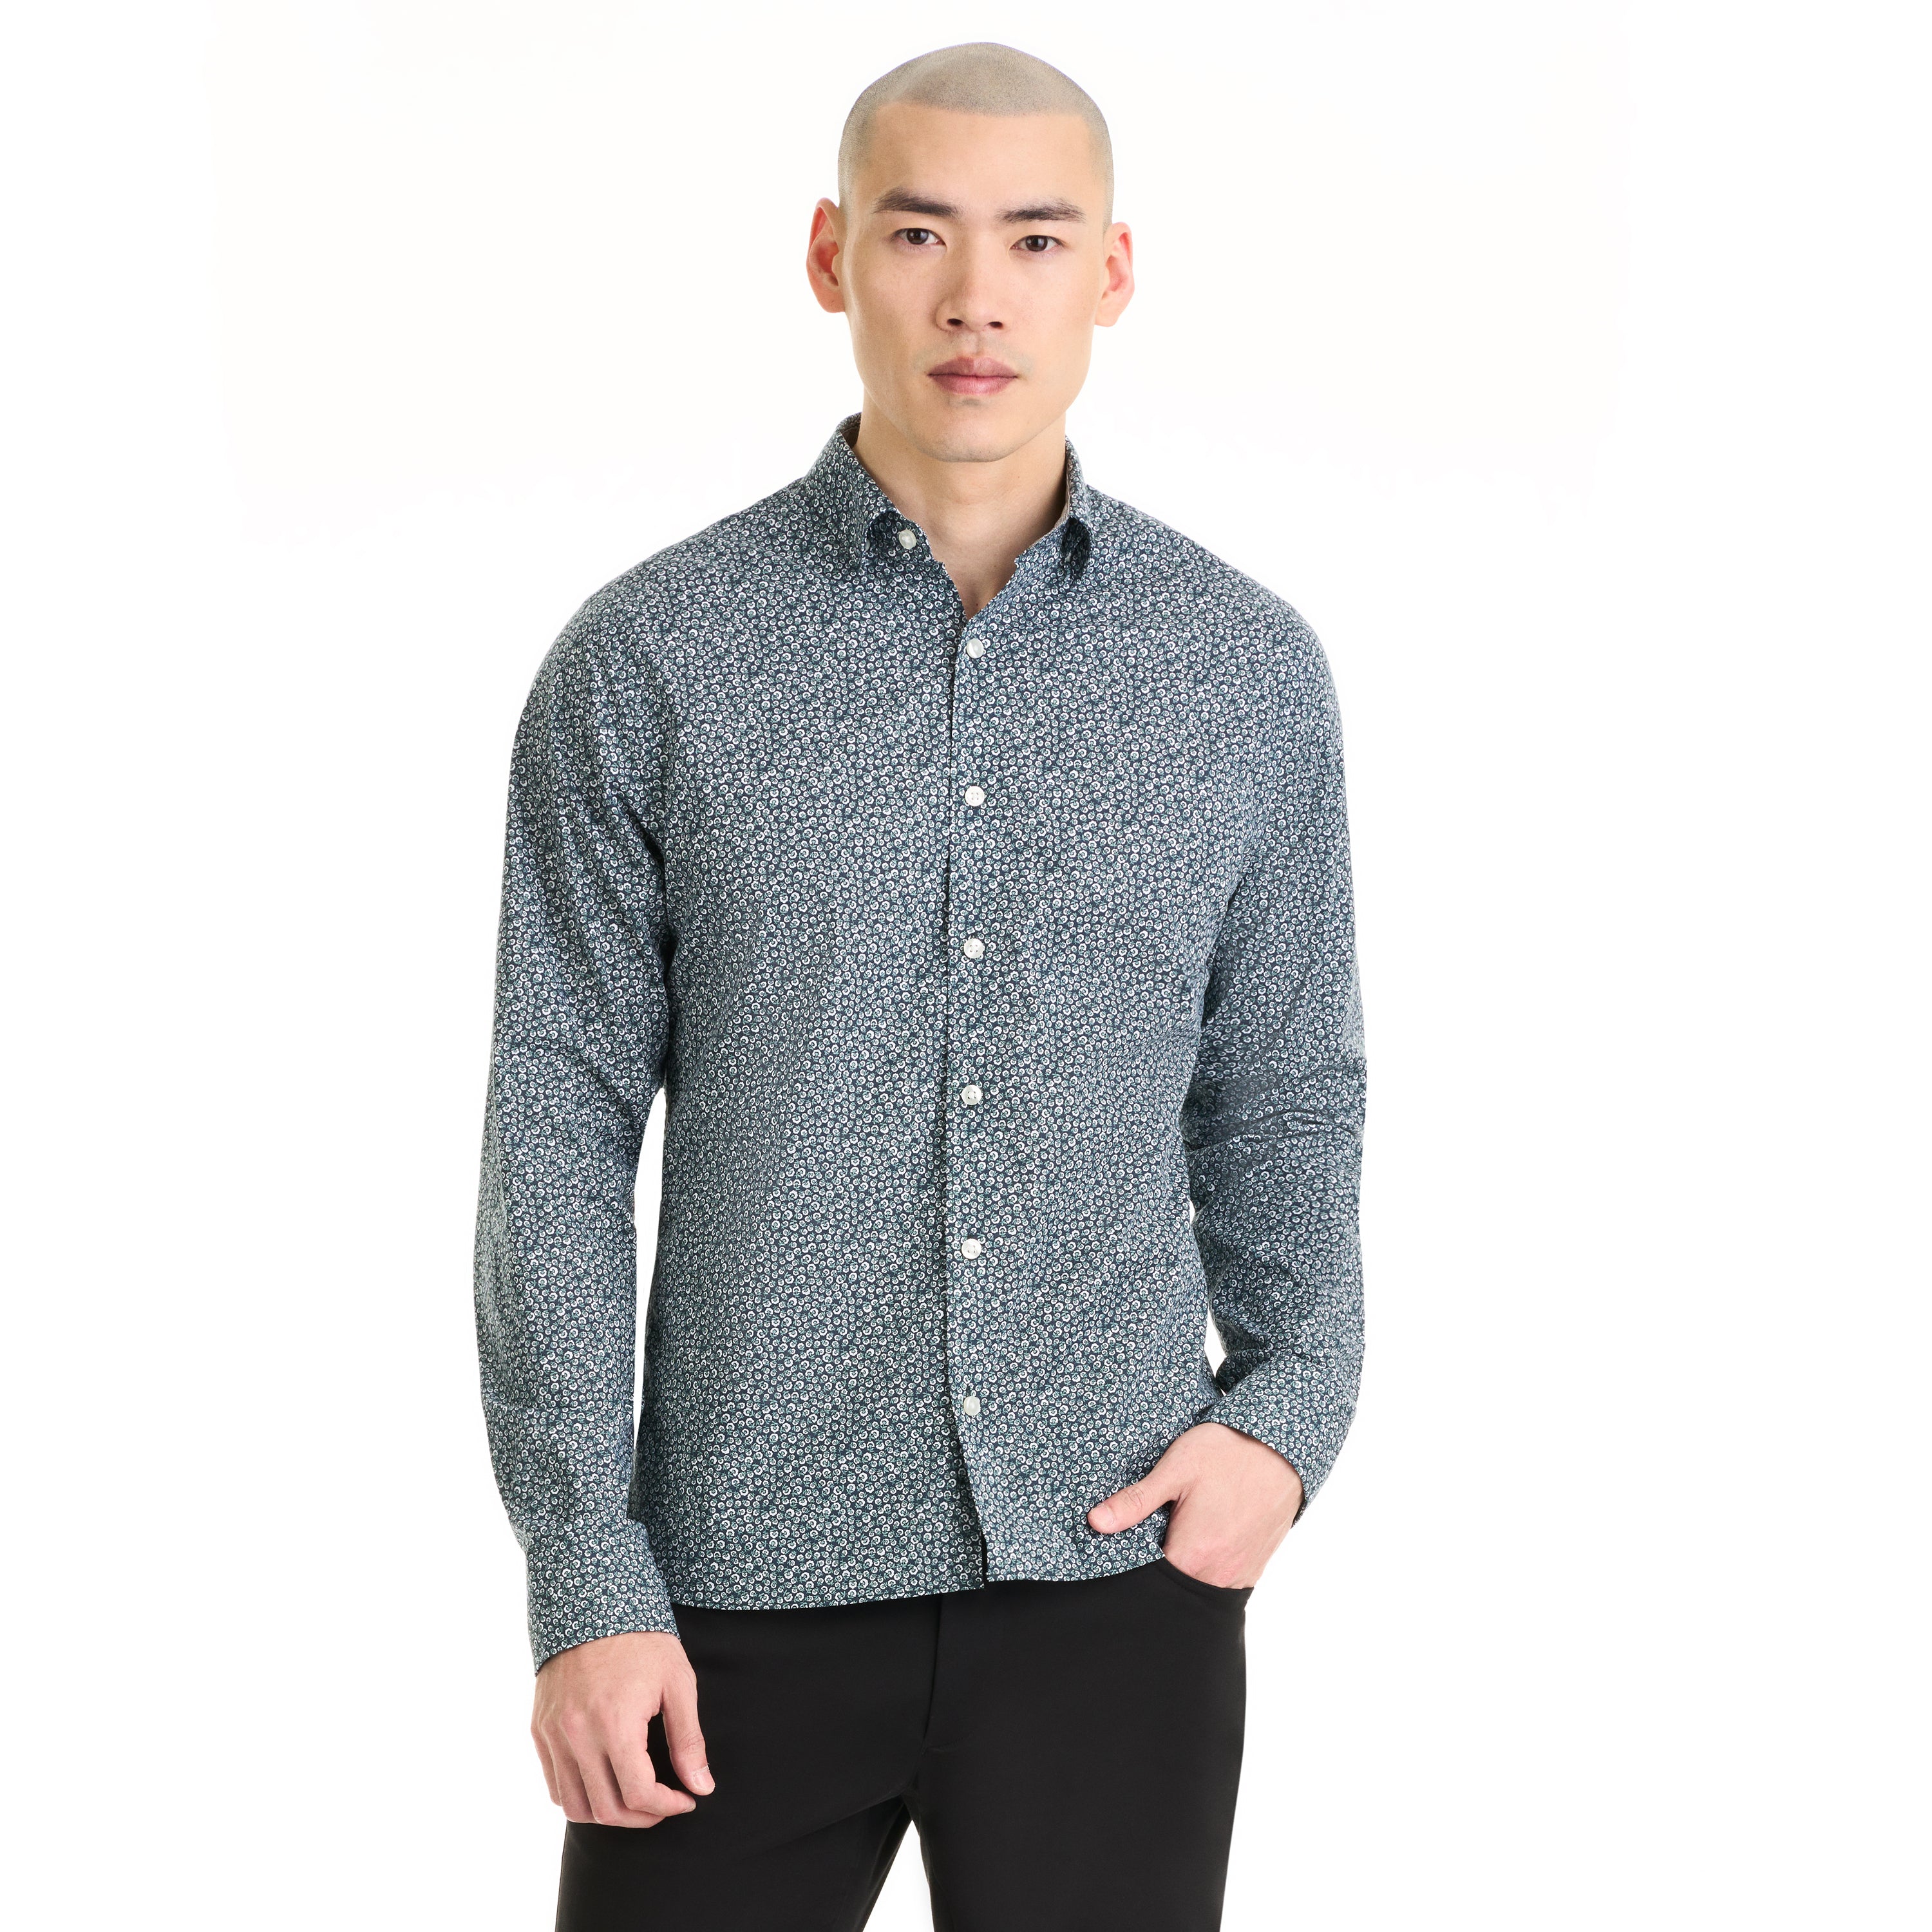 Essential Stain Shield Long Sleeve Shirt Wovens Floral Print - Slim Fit